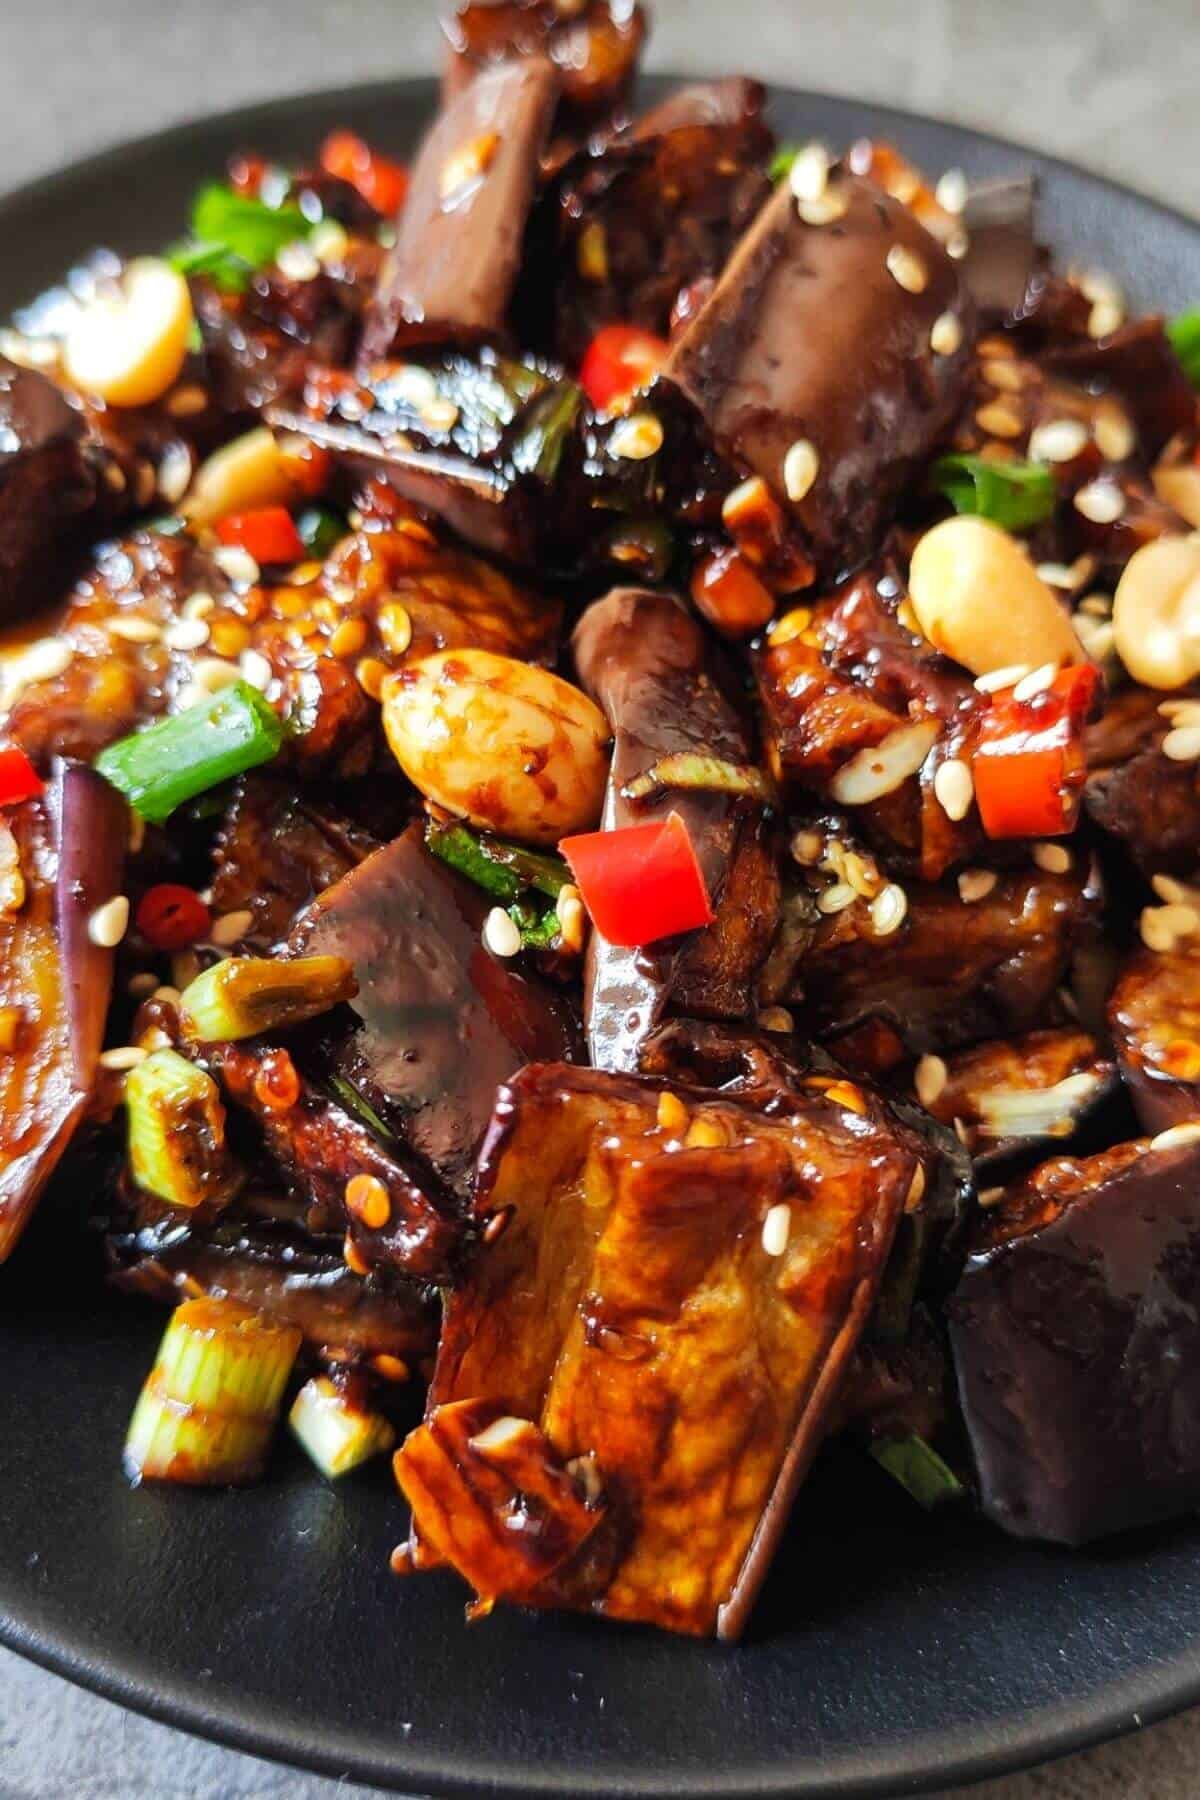 Asian eggplant with garlic sauce served on a black plate.